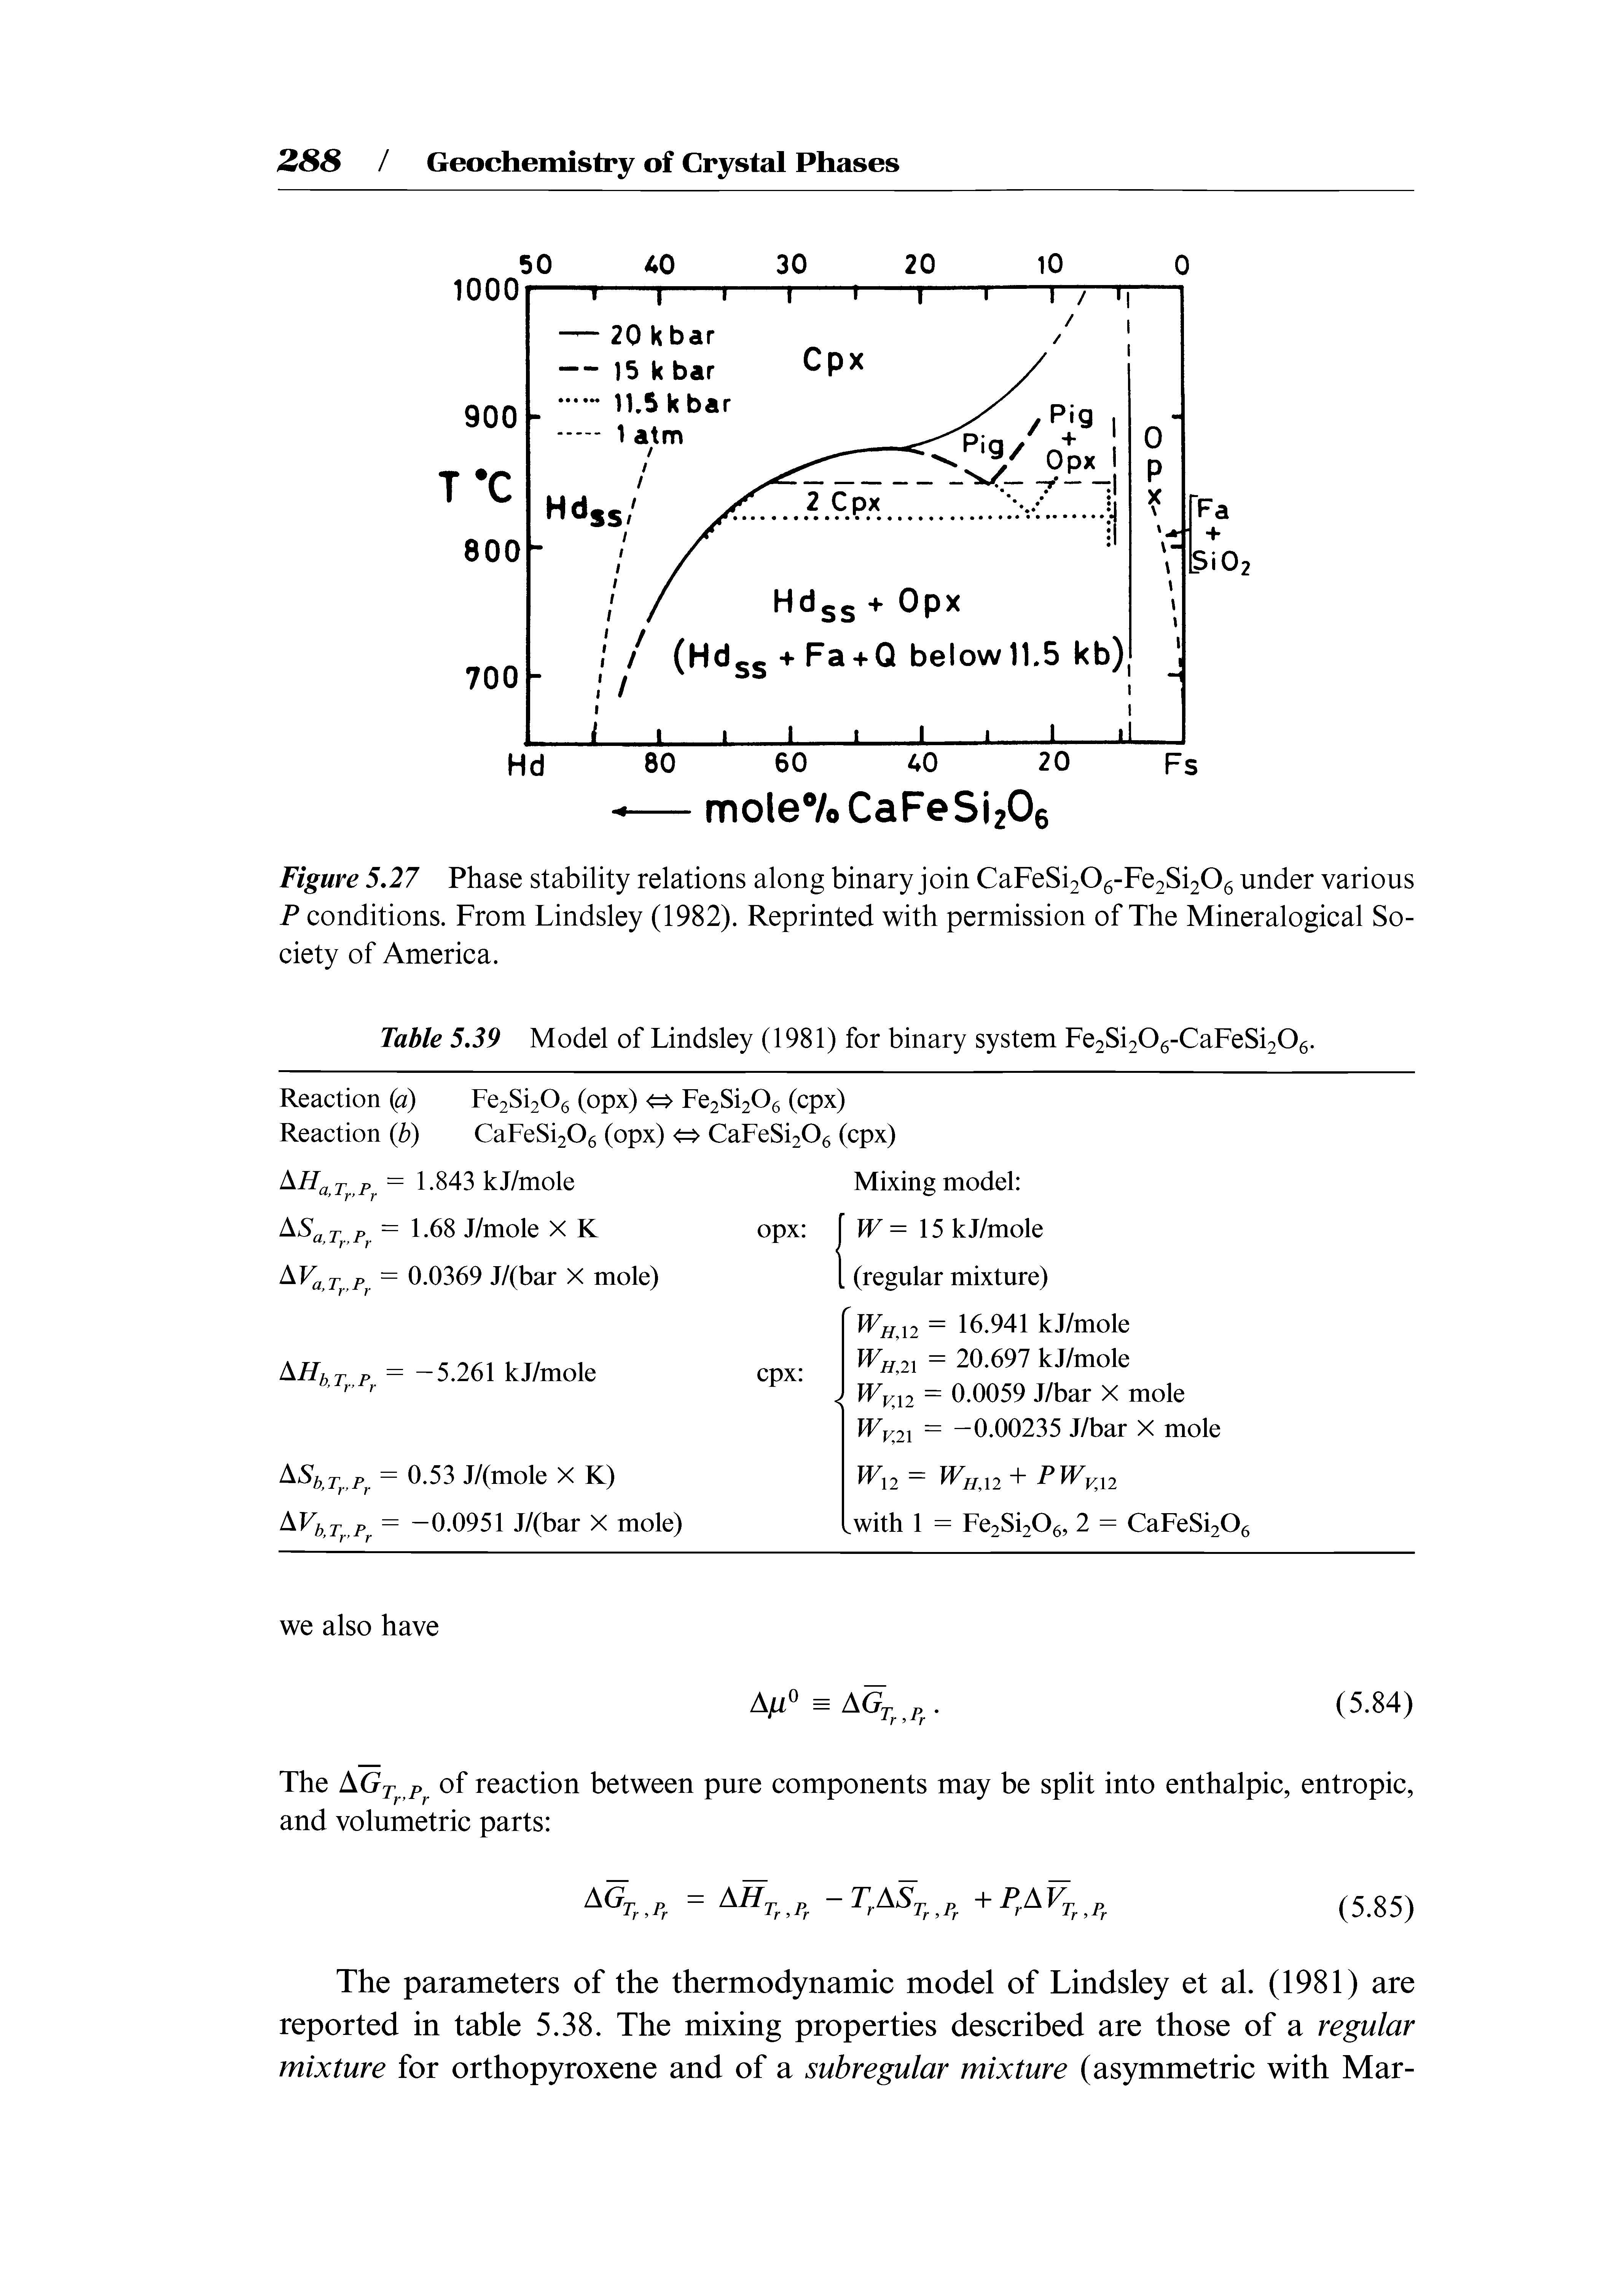 Figure 5,27 Phase stability relations along binary join CaFeSi206-Fe2Si206 under various P conditions. From Lindsley (1982). Reprinted with permission of The Mineralogical Society of America.